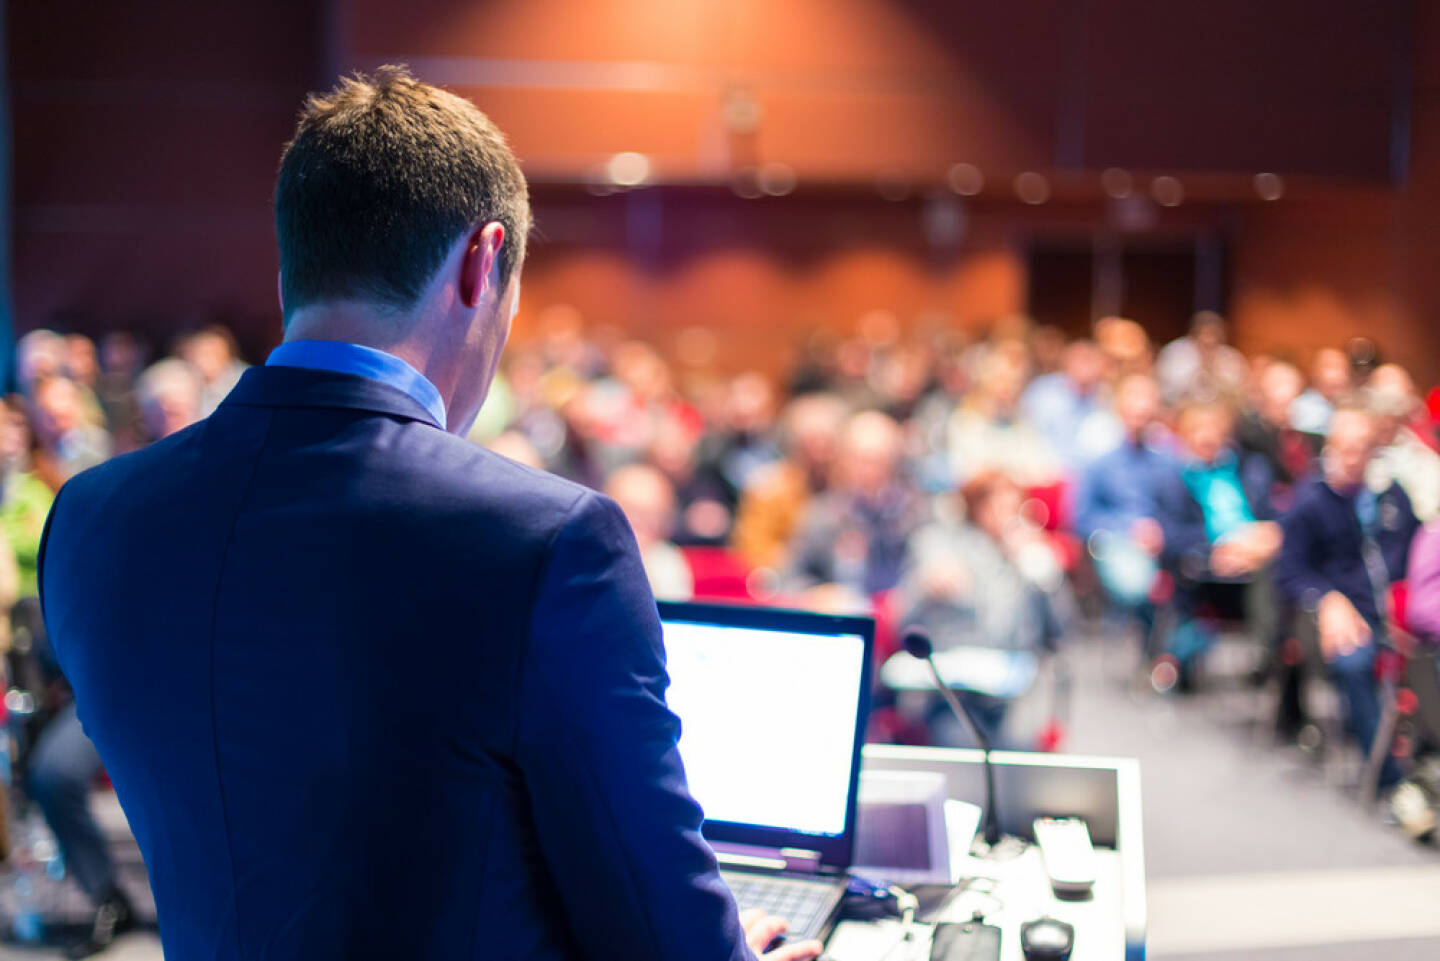 Vortrag, Präsentation, Roadshow - http://www.shutterstock.com/de/pic-193539209/stock-photo-speaker-at-business-conference-and-presentation-audience-at-the-conference-hall.html  (Bild: shutterstock.com)